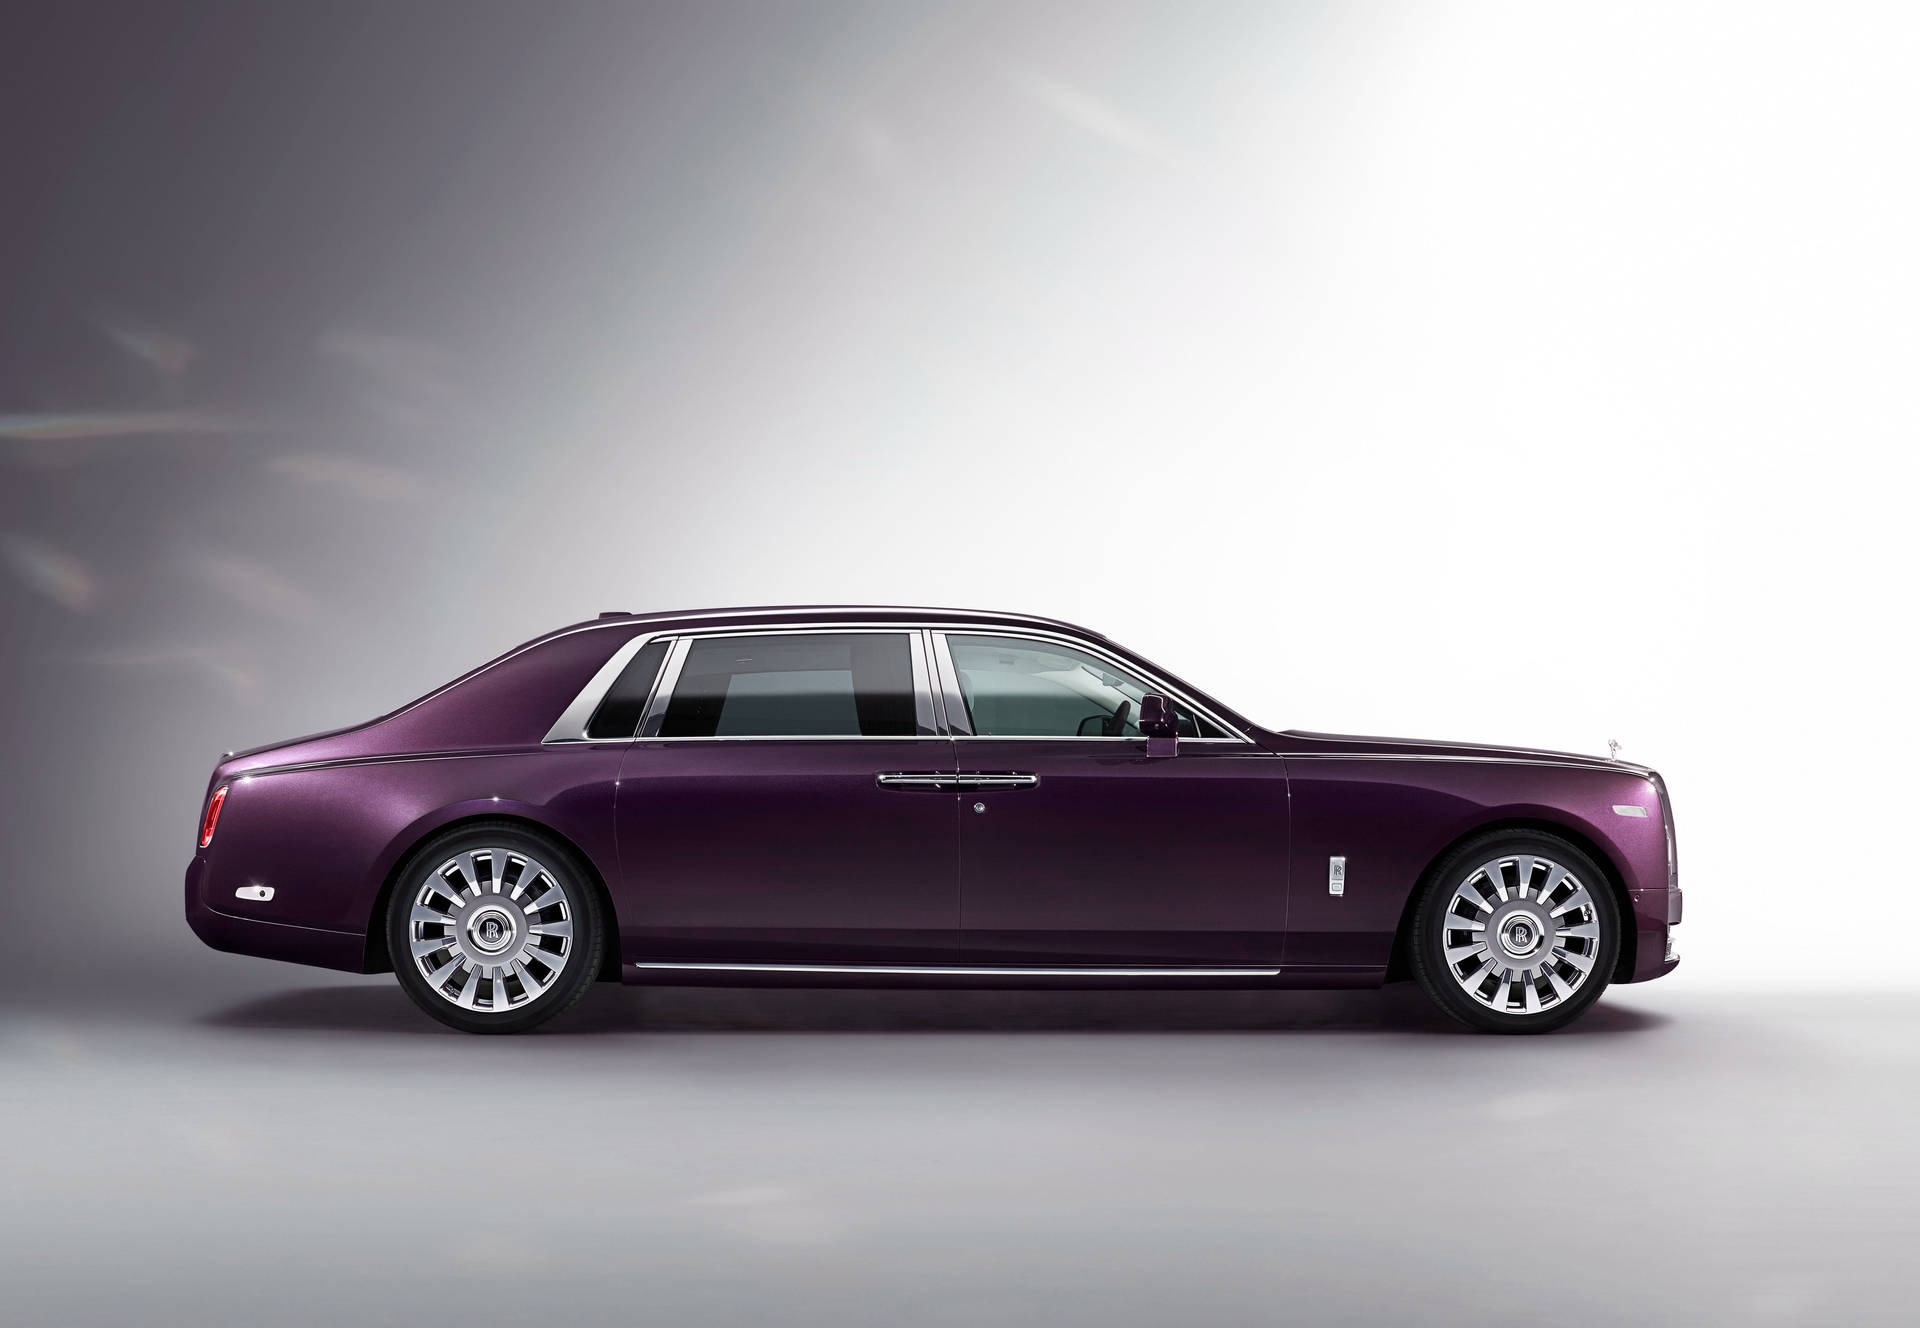 Rolls-Royce's new sedan, with silk and cherry blossoms, is as